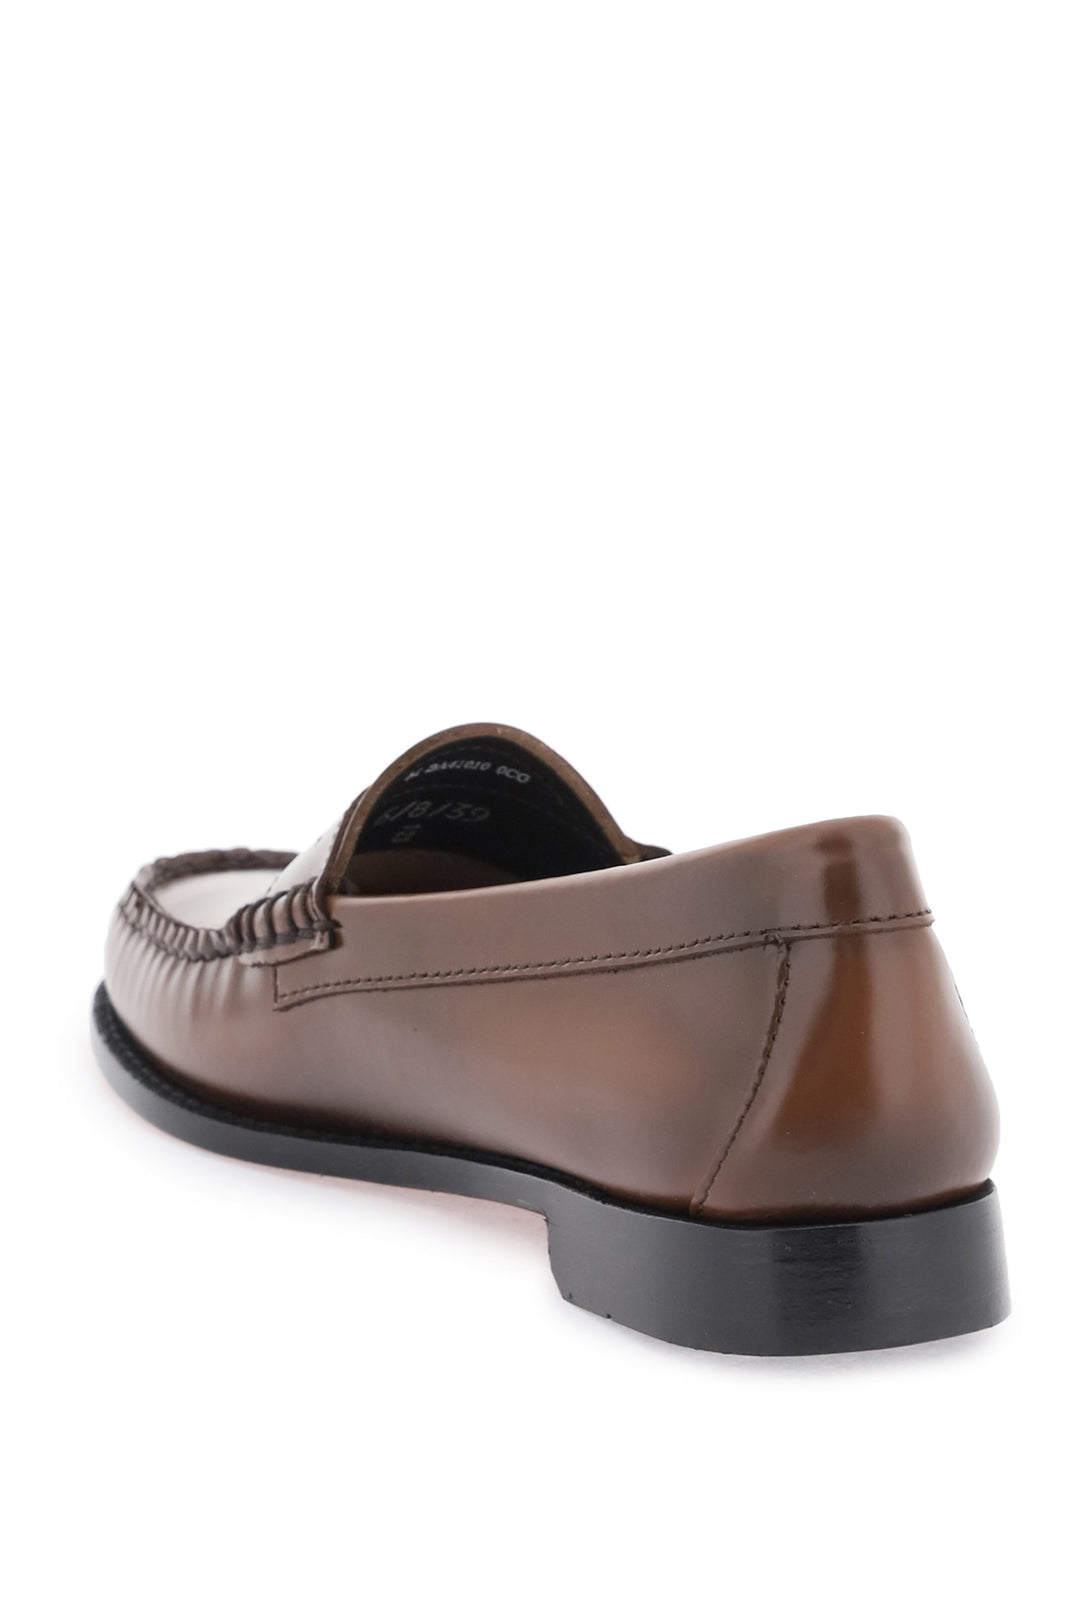 G.H. Bass 'Weejuns' Penny Loafers   Brown